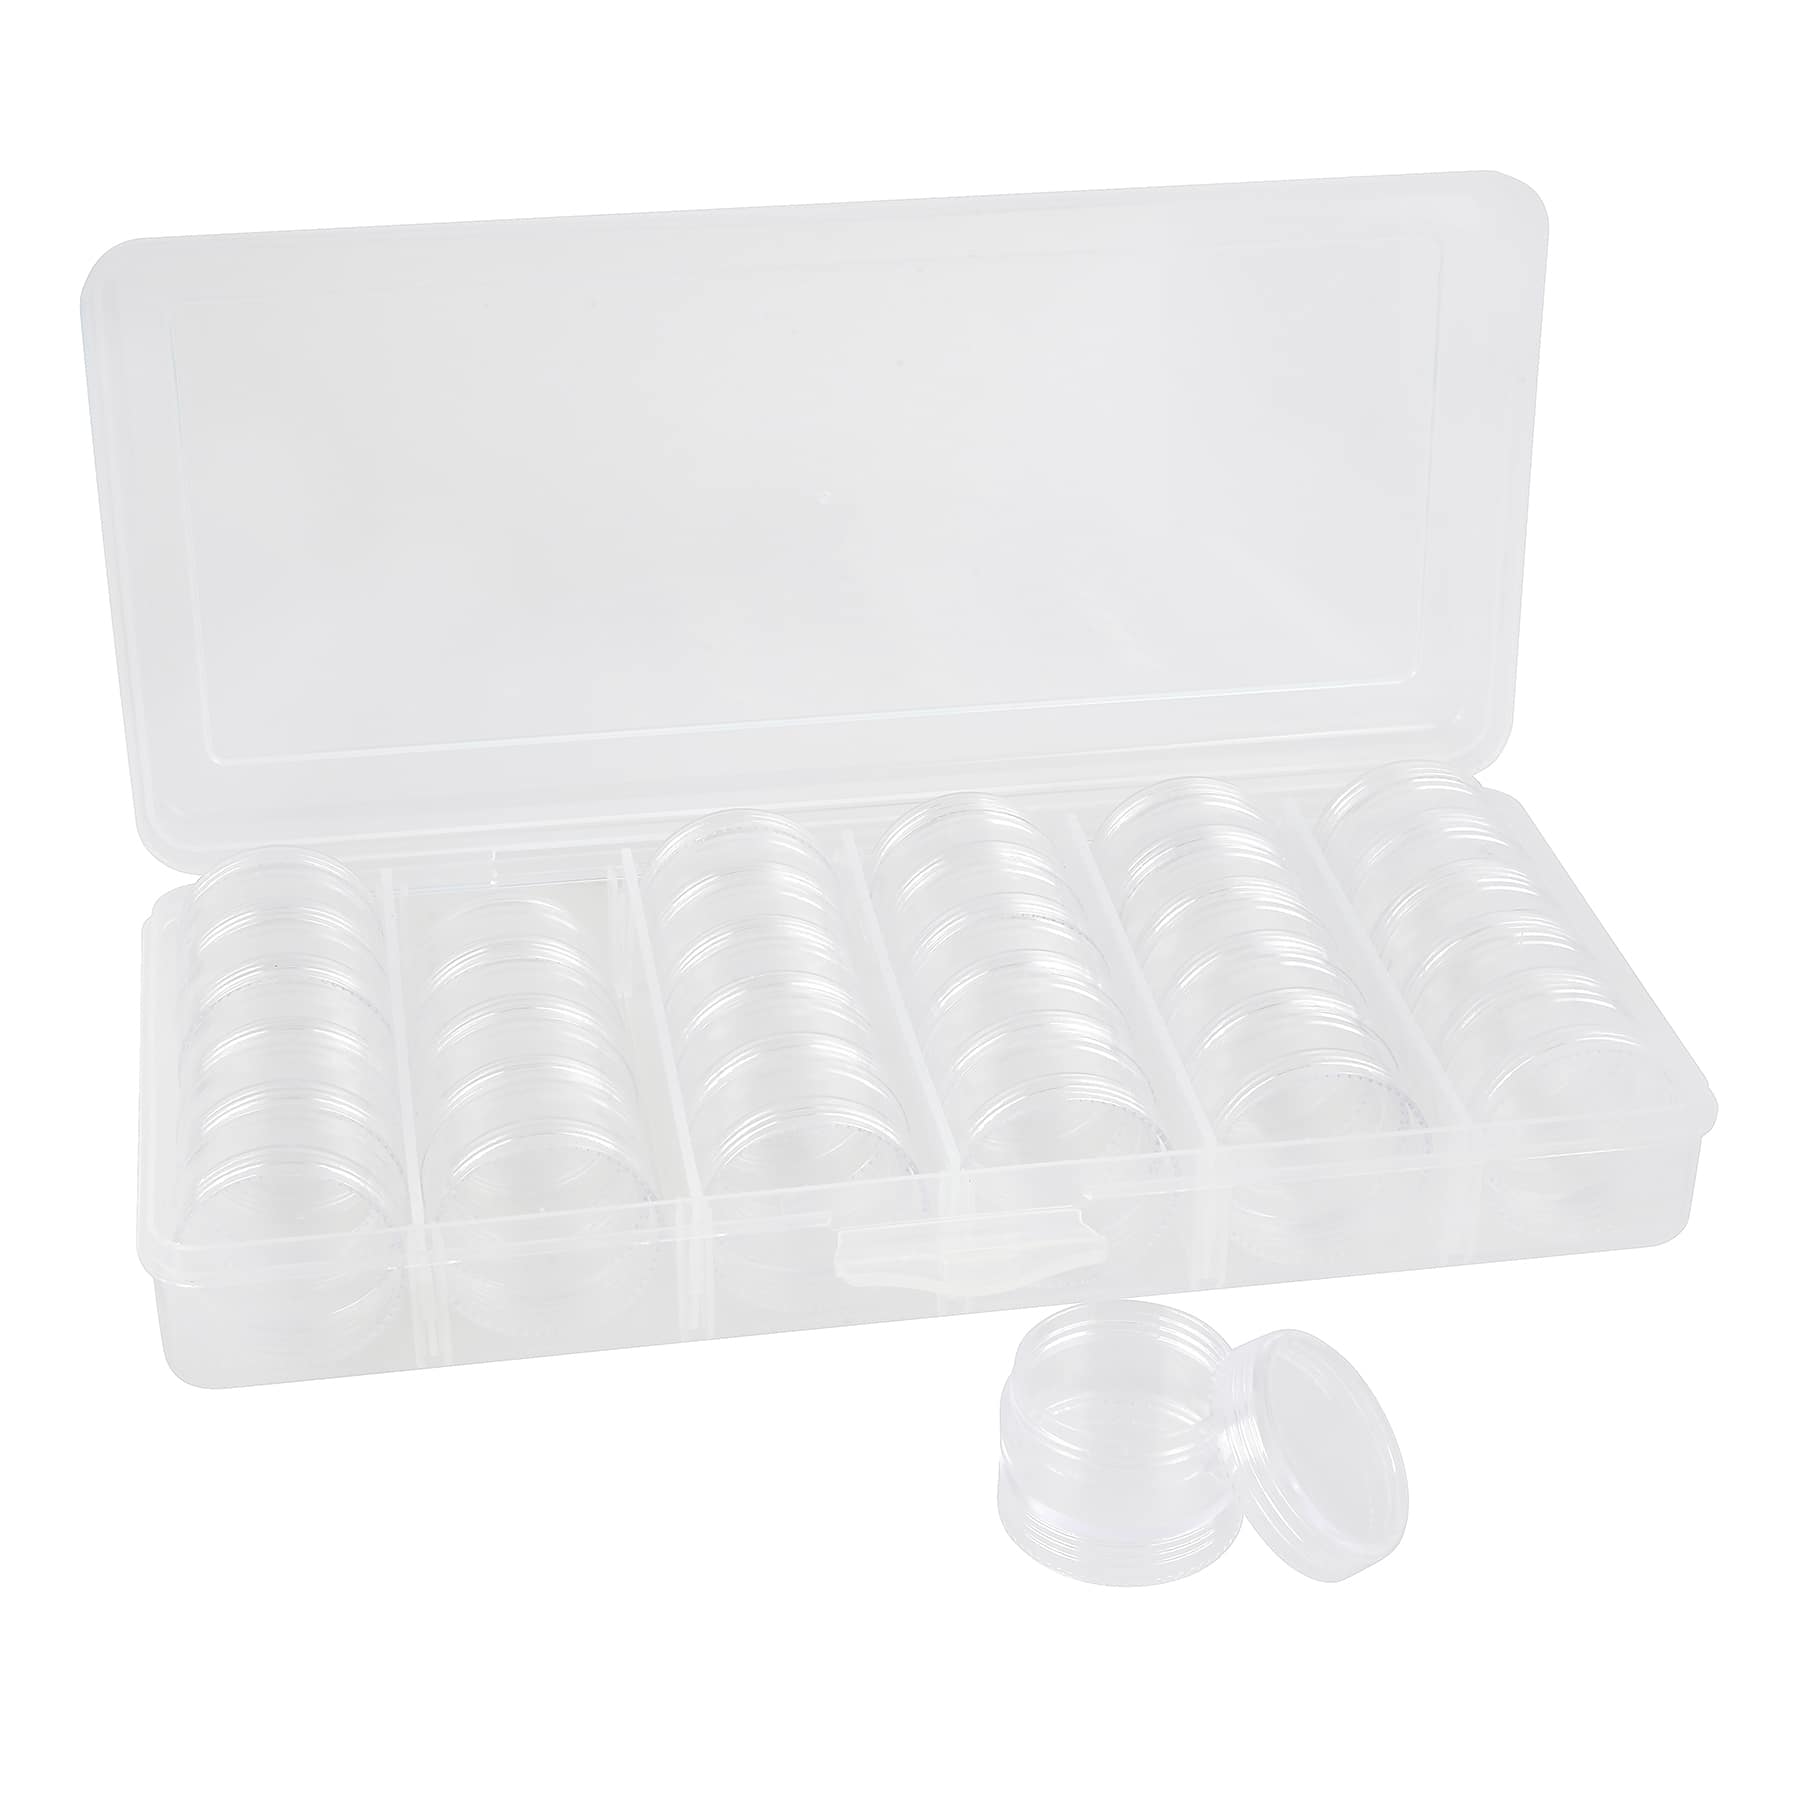 6 Pack: Bead Storage Box with Adjustable Compartments by Bead Landing™